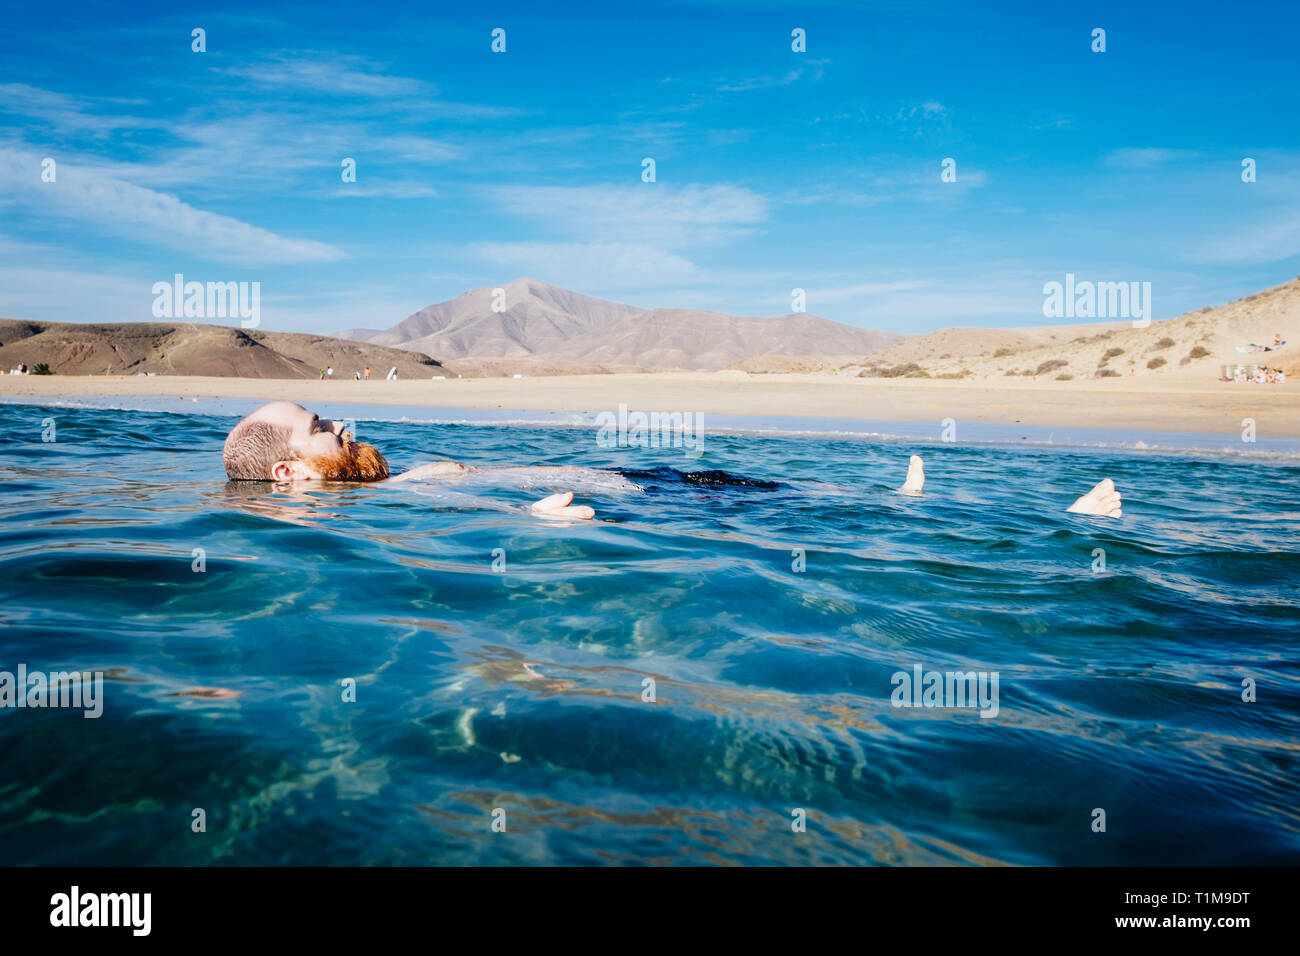 Carefree man floating in blue ocean water, Papagayo Beach, Lanzarote, Canary Islands, Spain Stock Photo